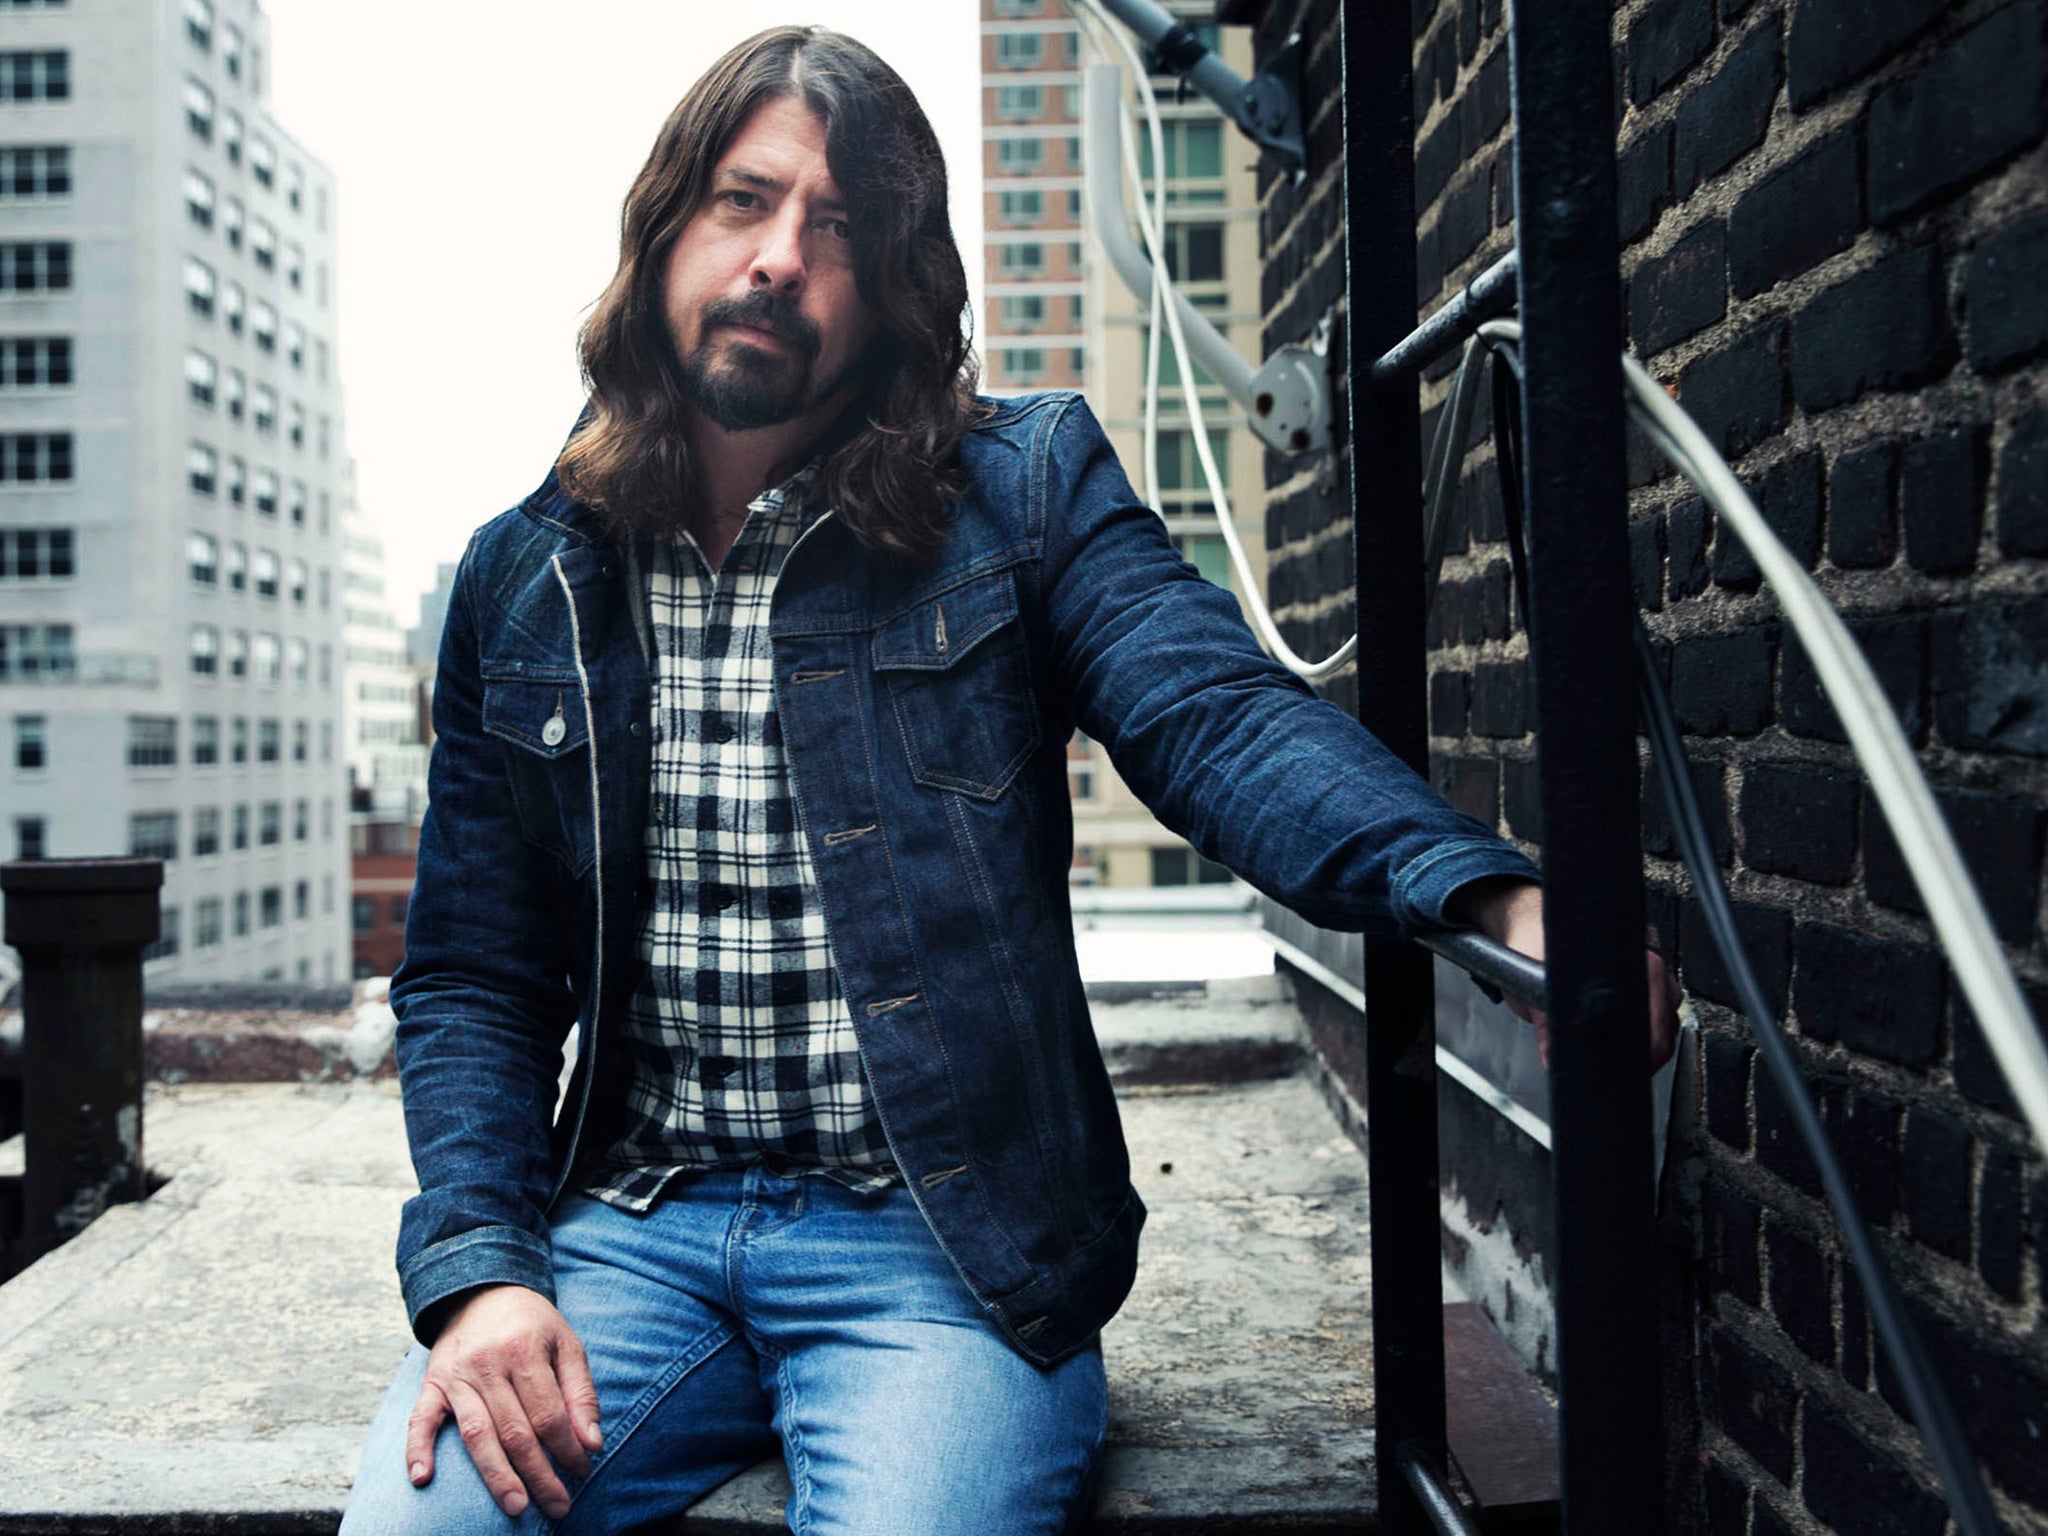 Foo Fighters frontman Dave Grohl will not be removing his music from Spotify anytime soon